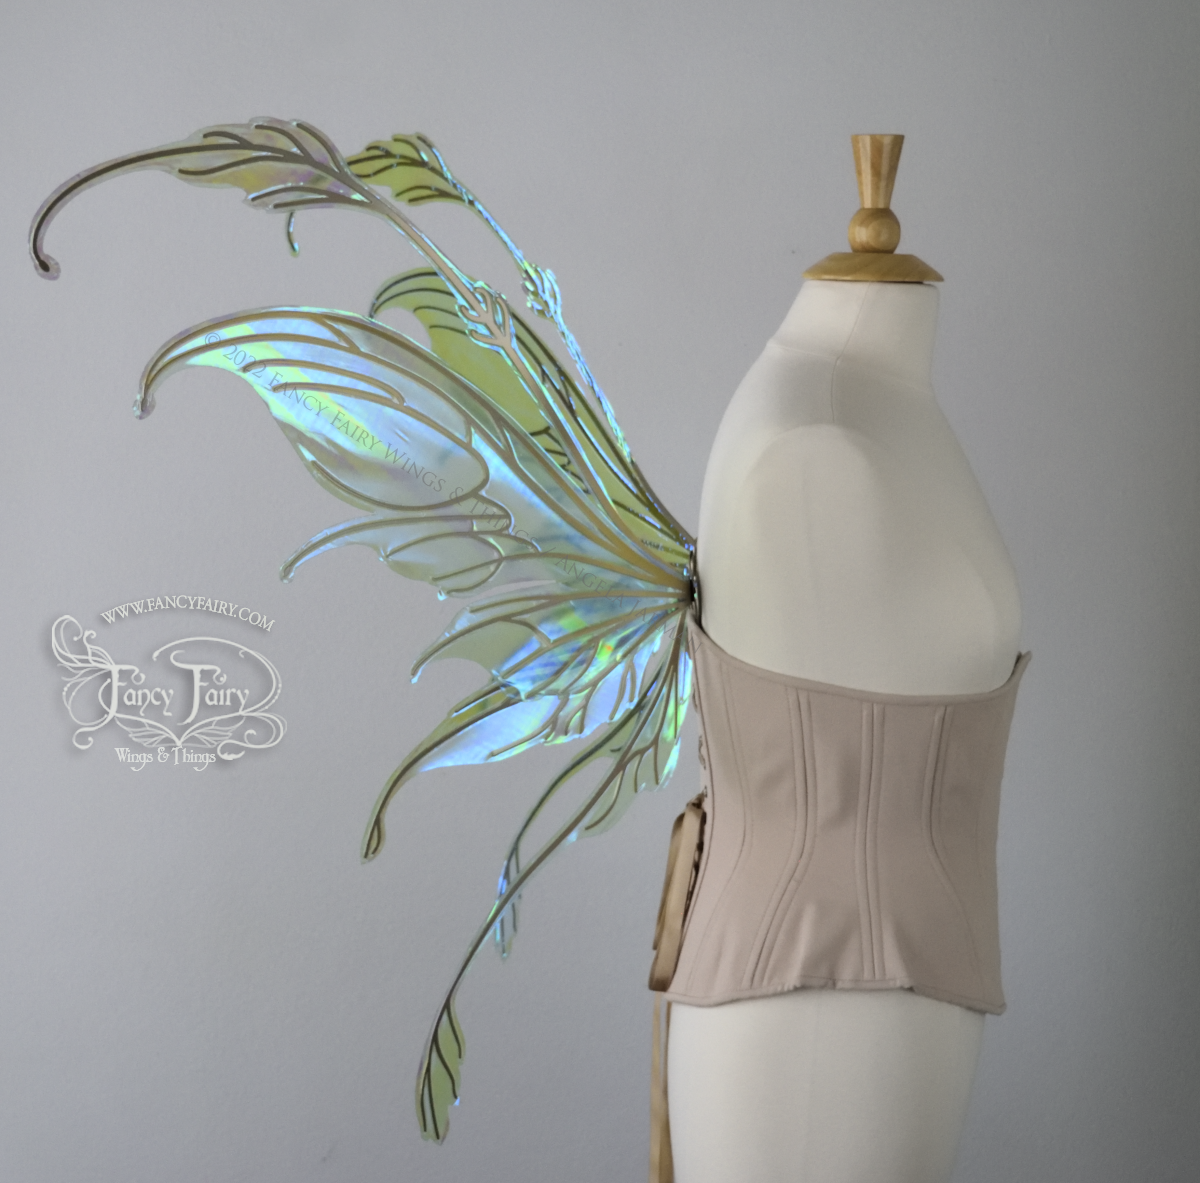 Fauna Iridescent Convertible Fairy Wings in Absinthe with Gold veins